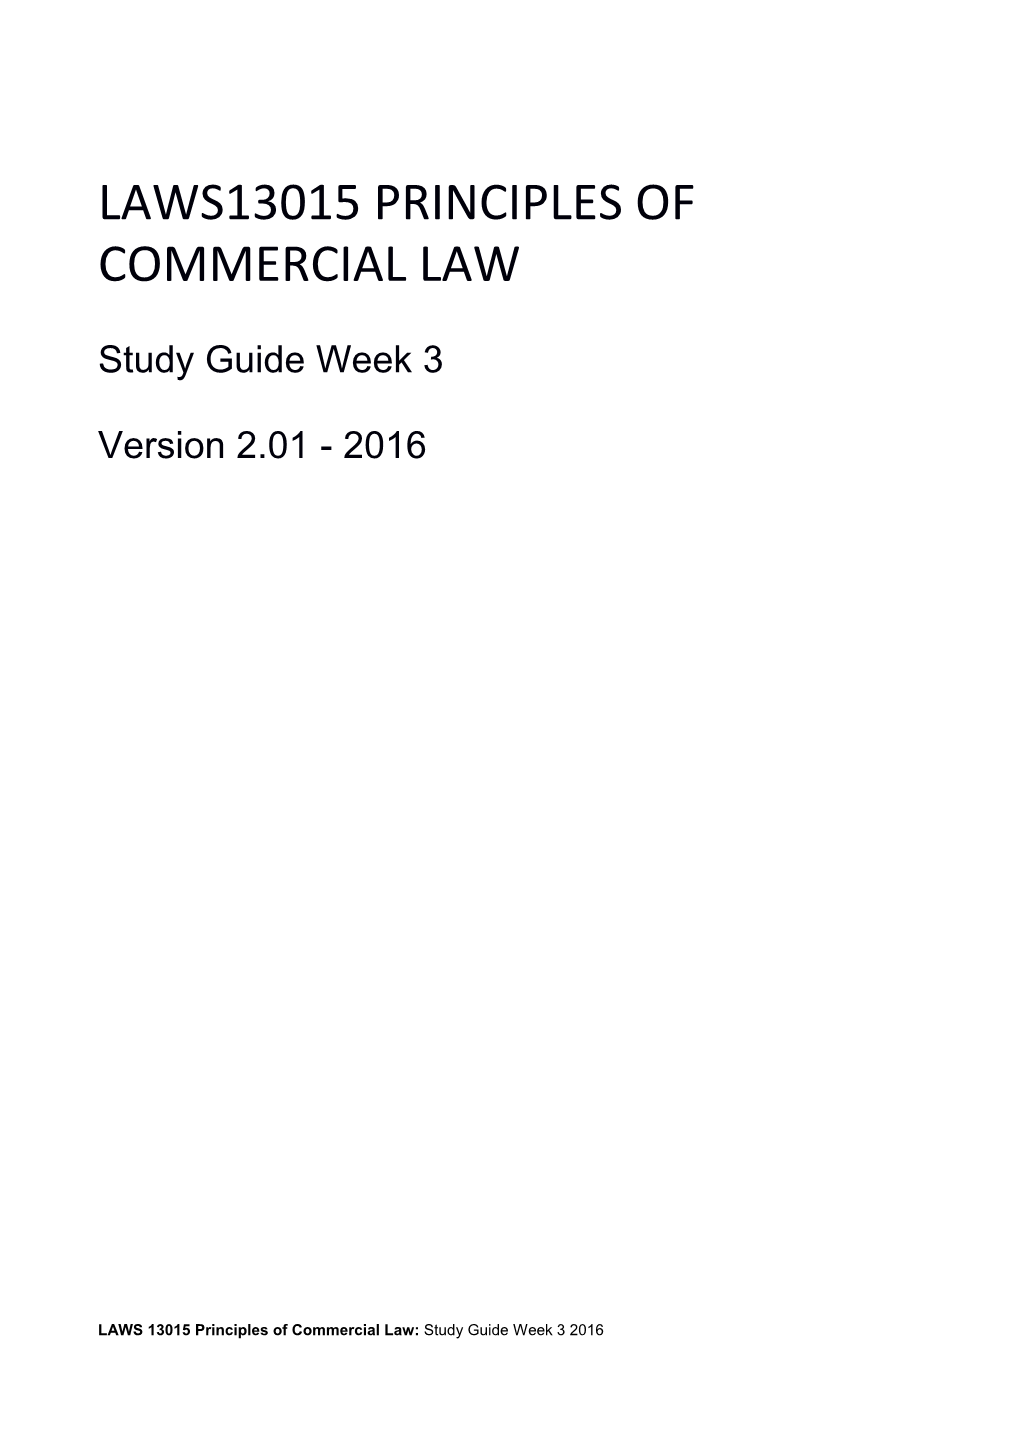 LAWS 13015 Principles of Commercial Law: Study Guide Week 3 2016